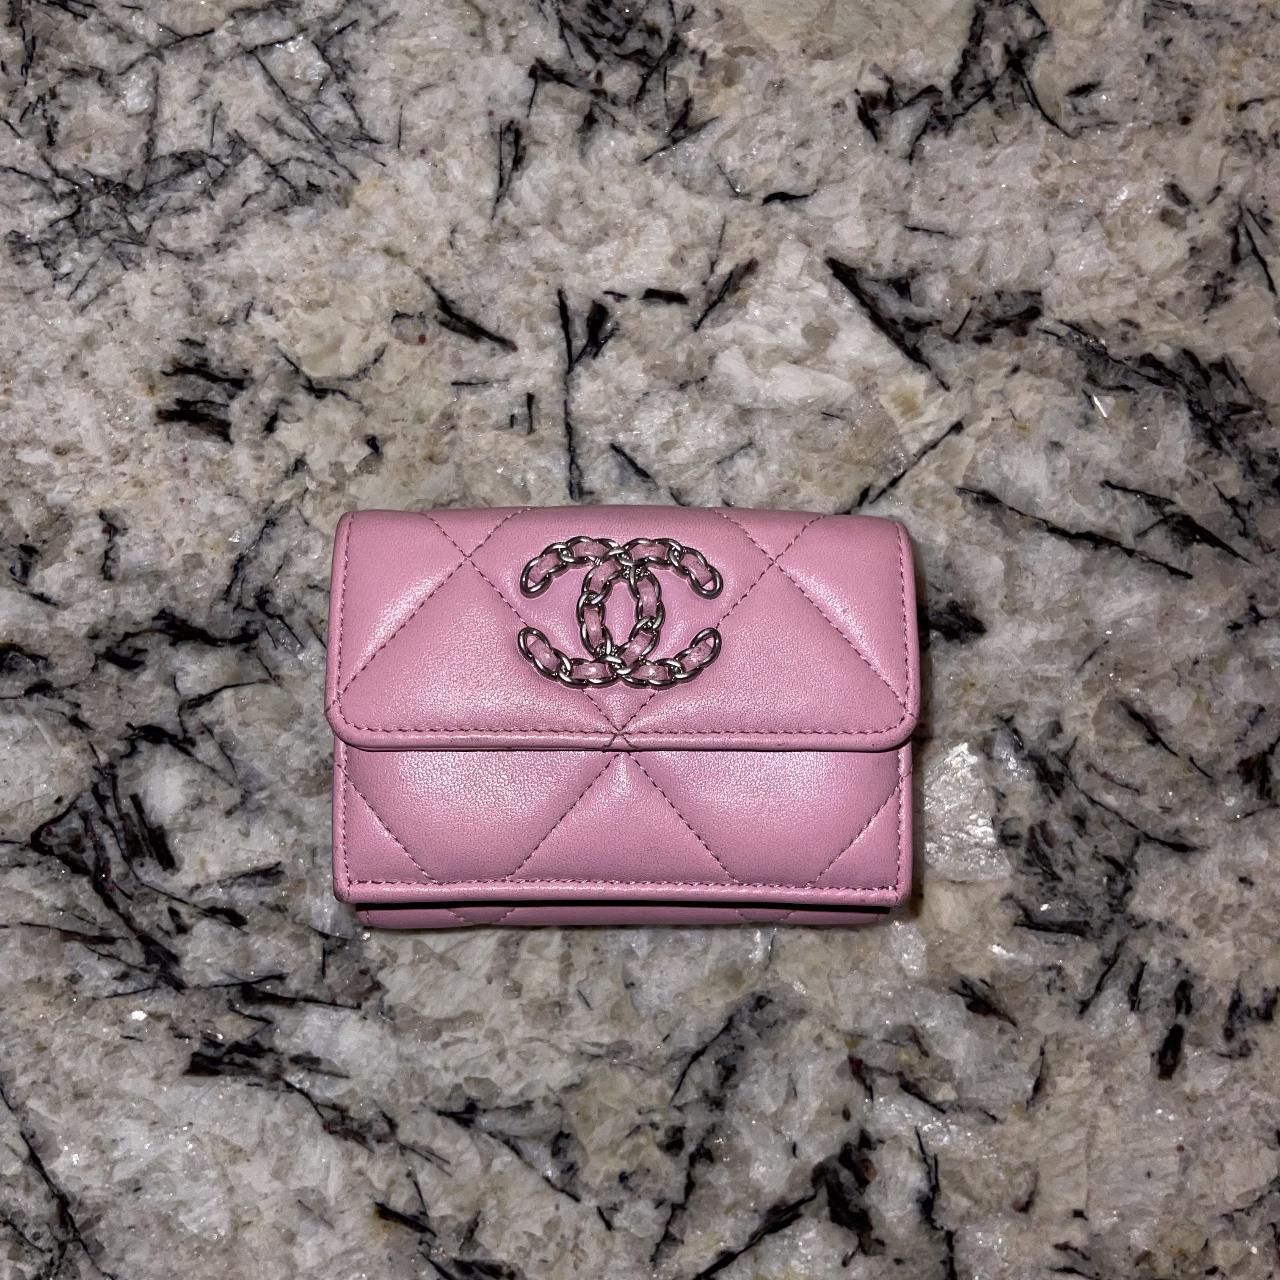 authentic Chanel 19 Small Flap Wallet in pink from... - Depop